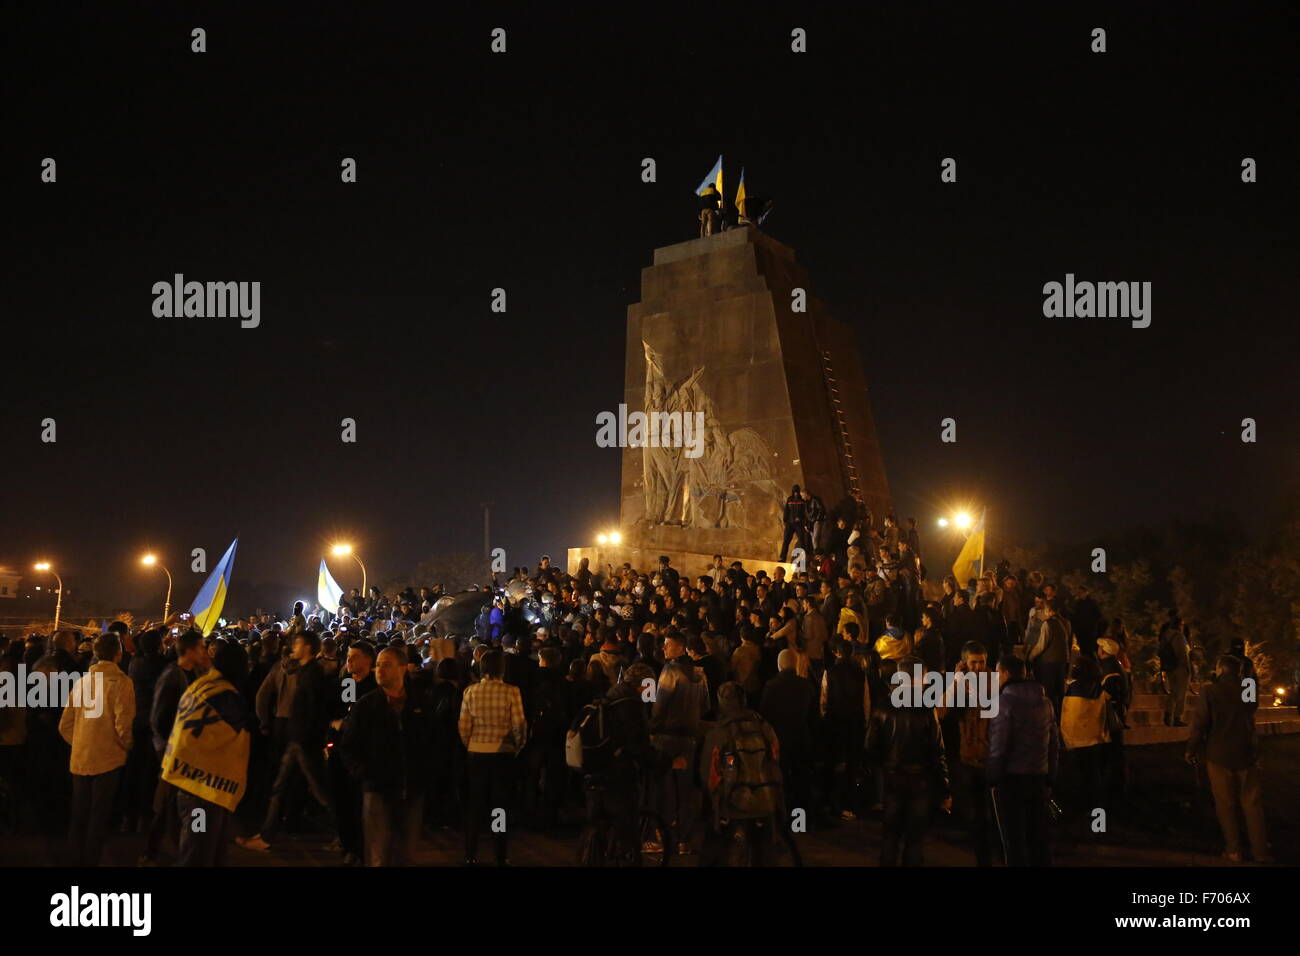 Ukrainianian protesters celebrate after cutting down the Lenin Statue on Freedom Square in Kharkiv, Ukraine, in a predominately Russian speaking area of the country. The statue, one of the largest in Ukraine, is on the largest square in the country. Stock Photo